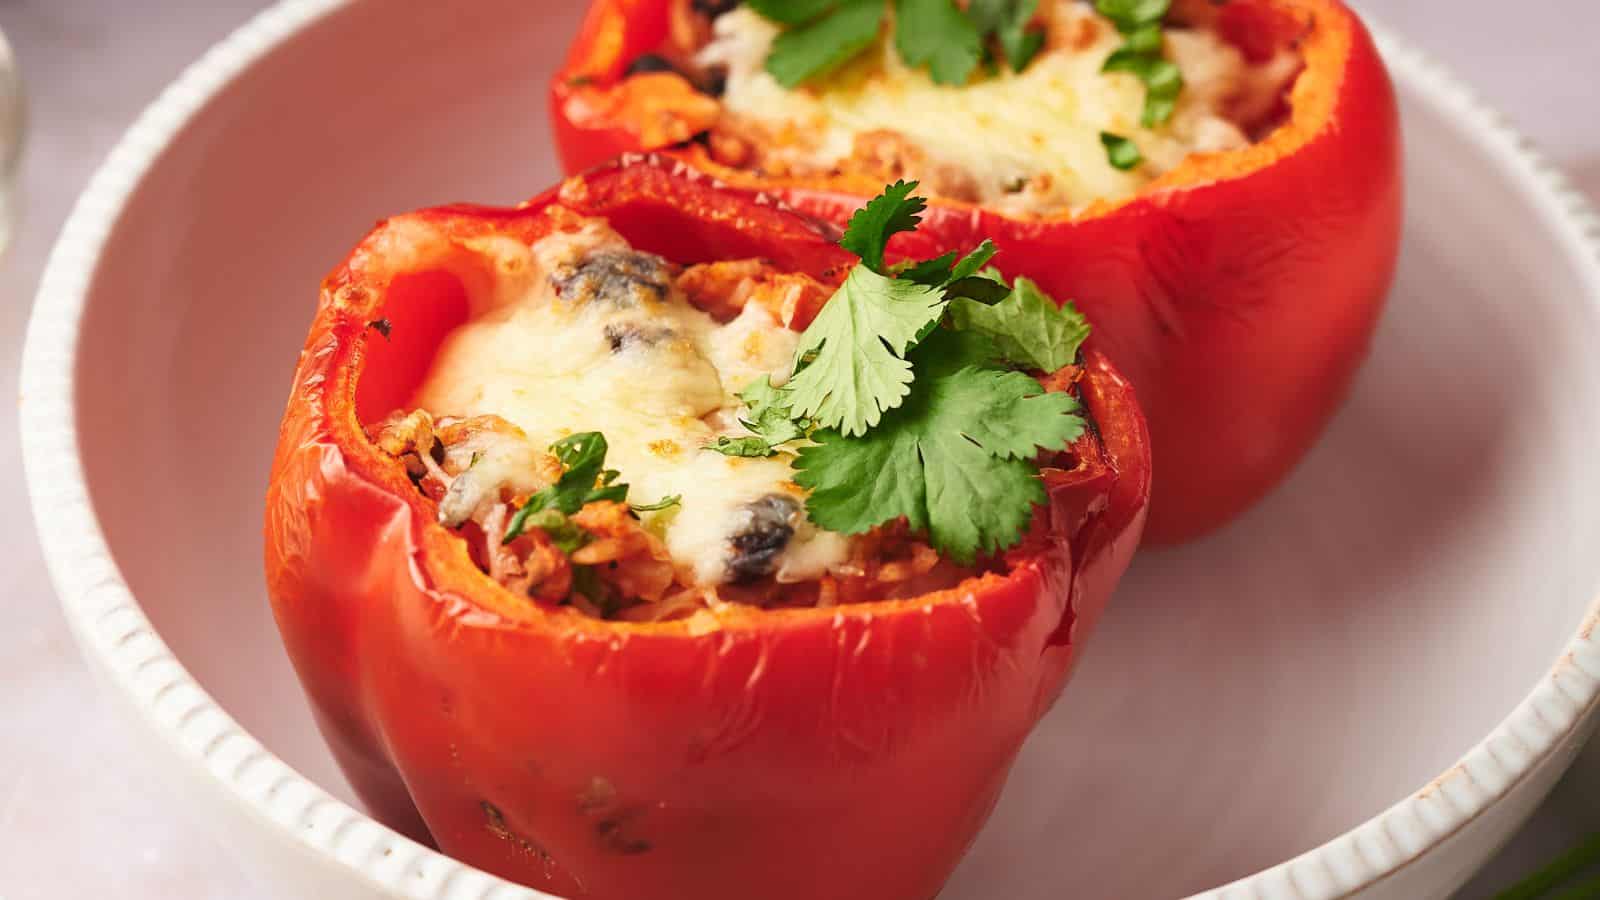 <p>Stuffed Peppers are an easy and nutritious option for dinner. With endless filling options, they can be tailored to your taste preferences without much fuss.<br><strong>Get the Recipe: </strong><a href="https://www.splashoftaste.com/vegetarian-stuffed-peppers/?utm_source=msn&utm_medium=page&utm_campaign=msn">Stuffed Peppers</a></p>